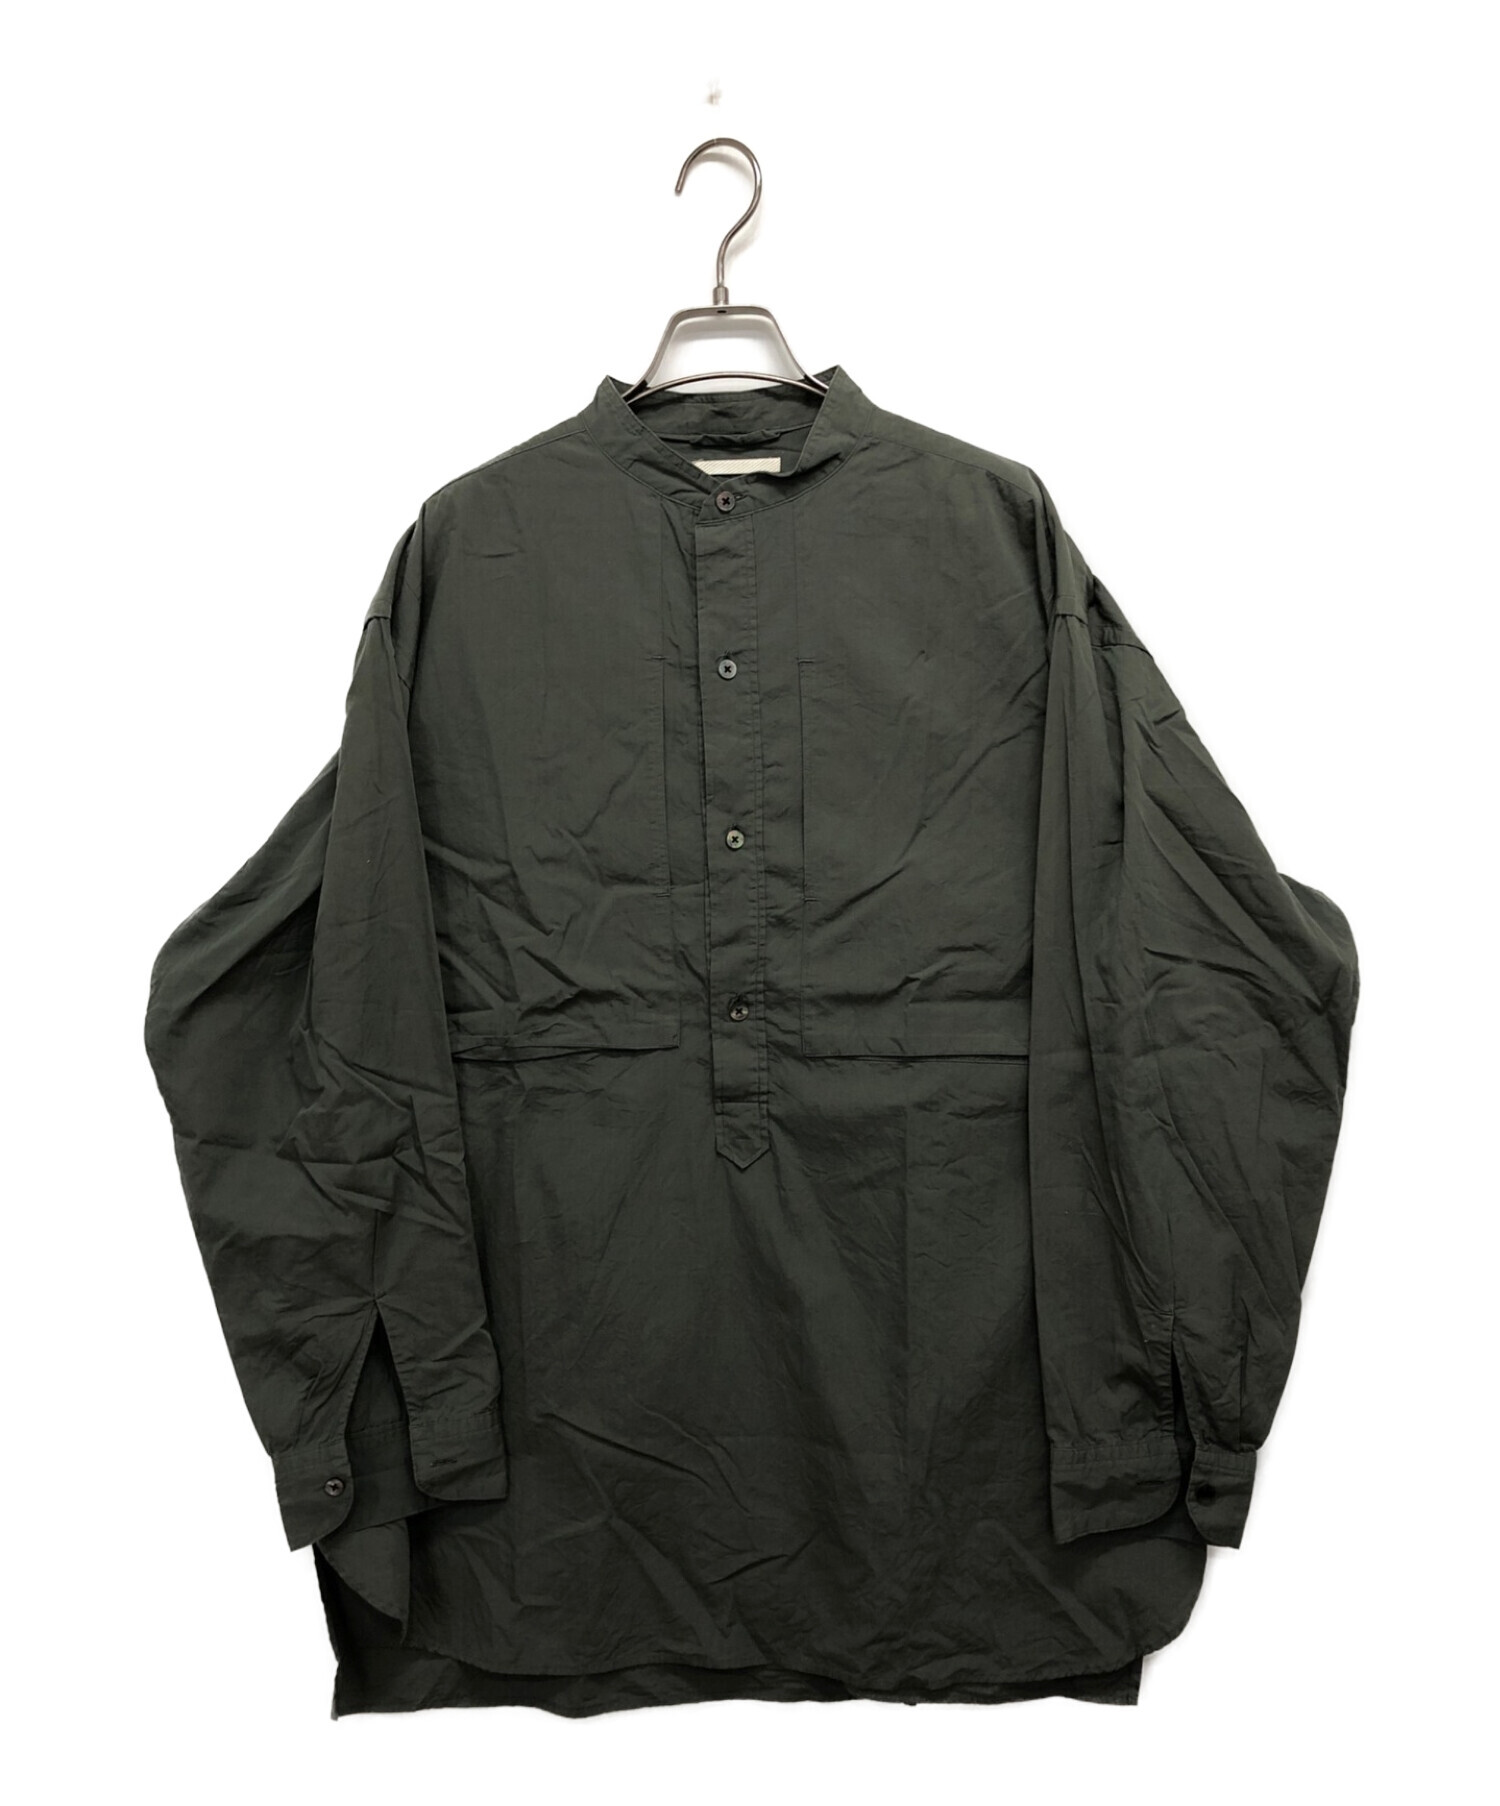 BLURHMS (ブラームス) High Count Chambray Pullover Washed Shirt グリーン サイズ:3